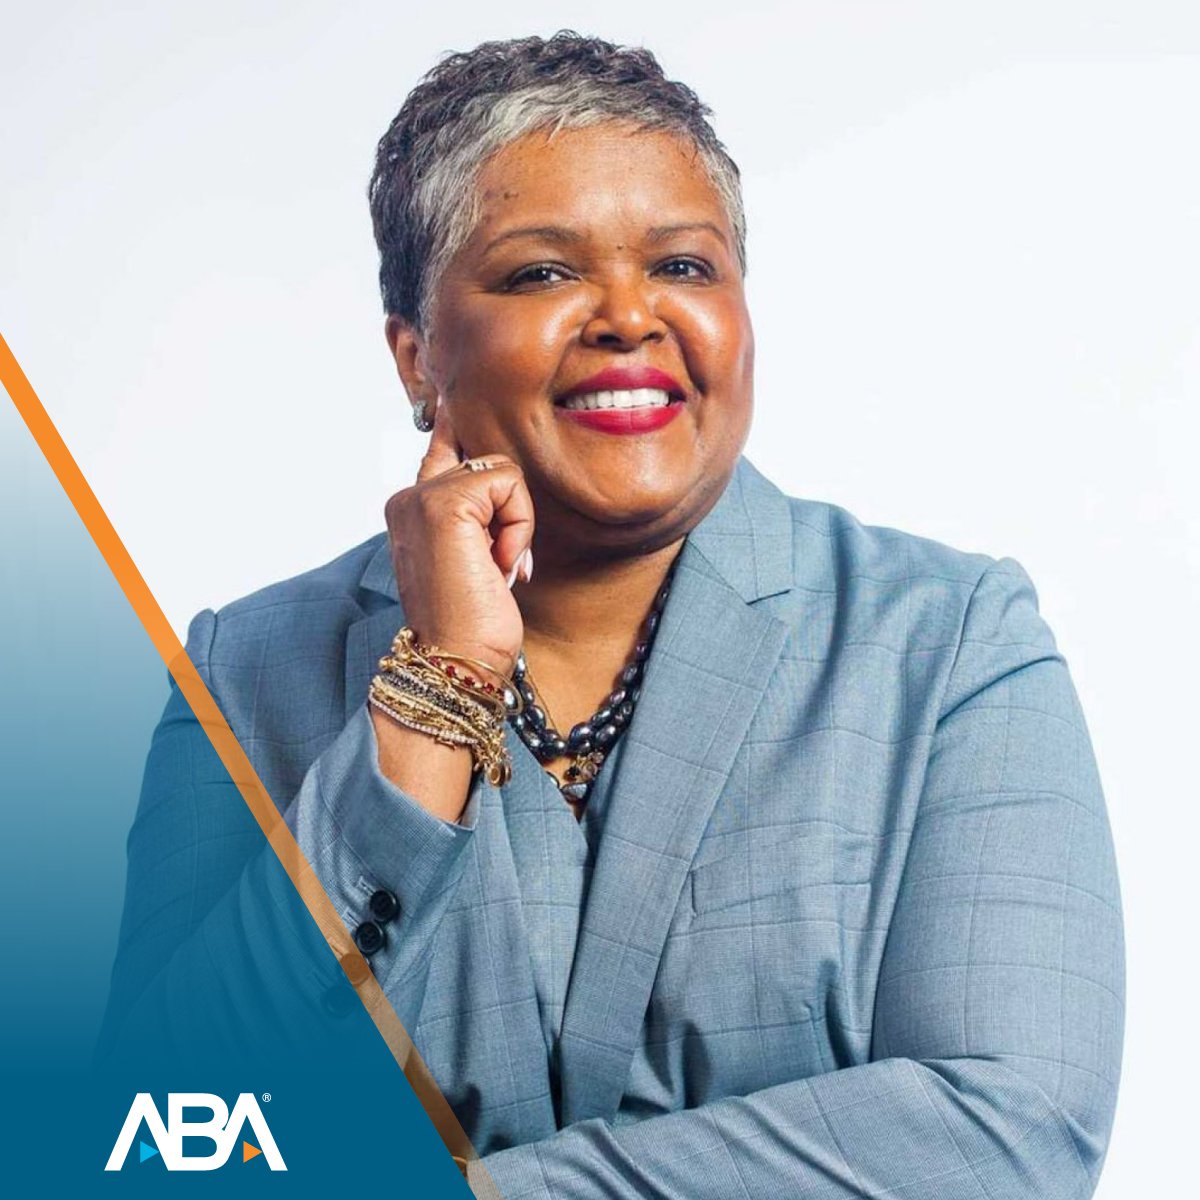 The American Bar Association is pleased to announce that Alpha M. Brady has been named the ABA's new executive director, following an extensive nationwide search. Brady is the first person of color to lead the ABA. Learn more here: ambar.org/o6cbje